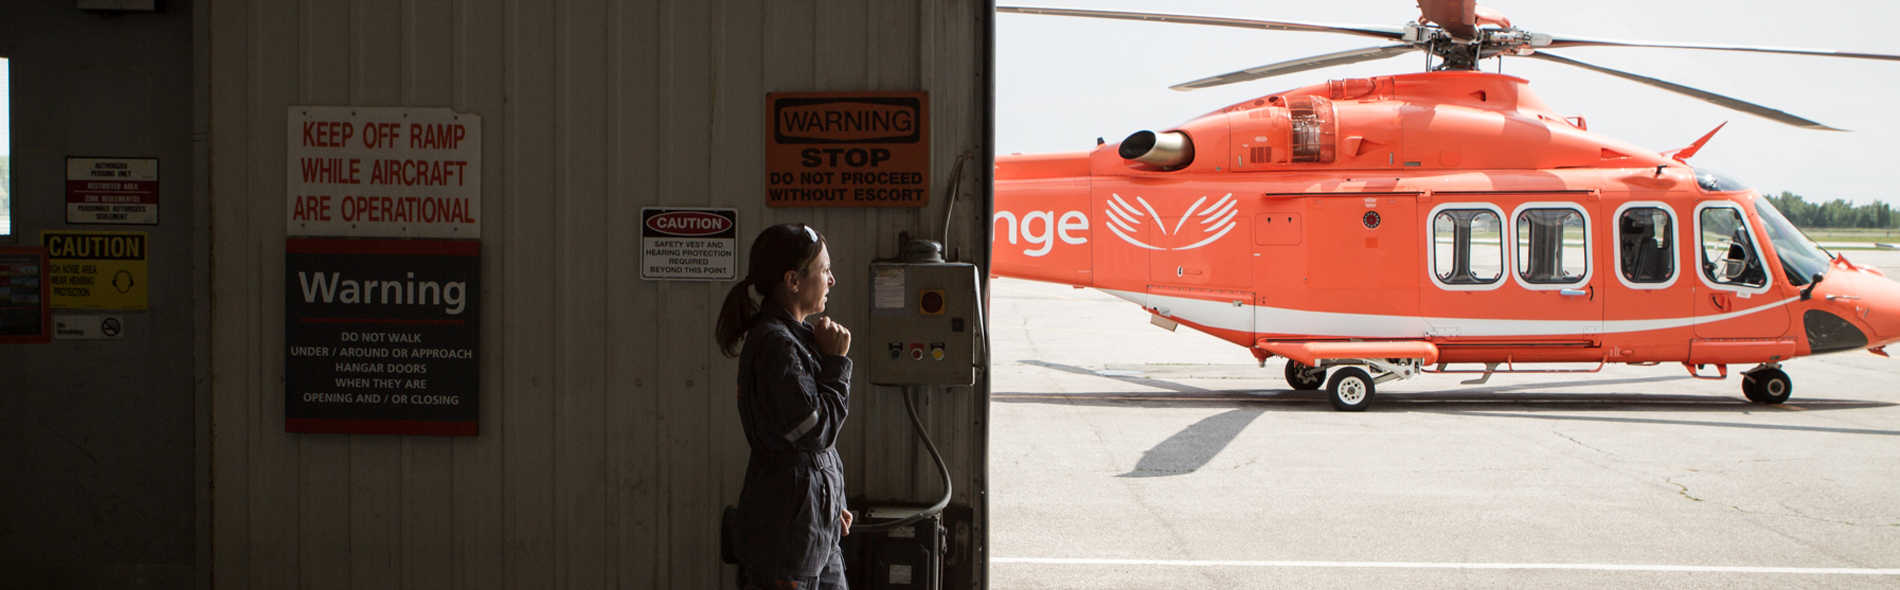 An Ornge employee talking with a headset on